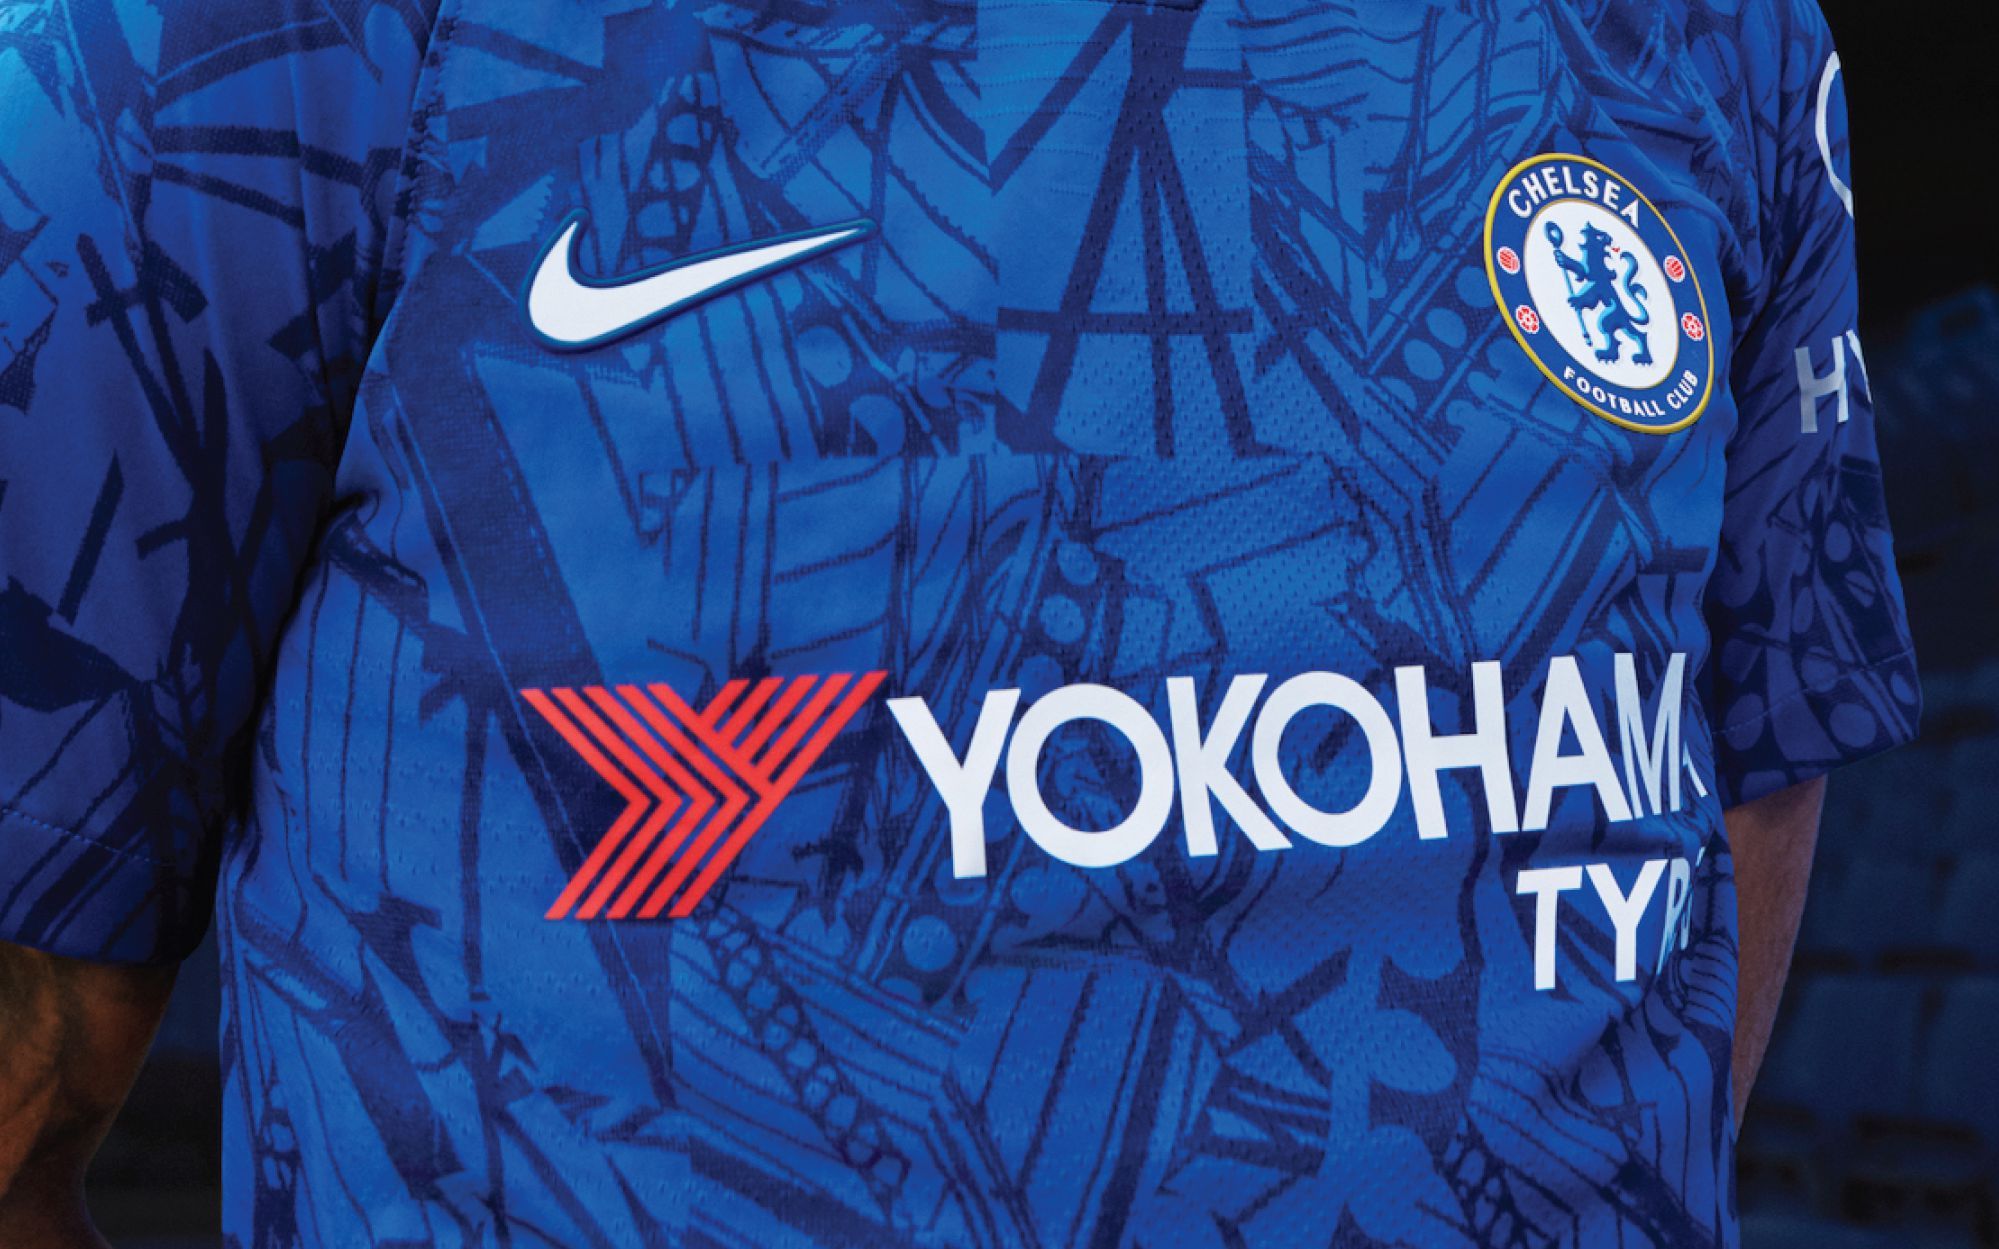 The new Chelsea's jersey inspired by Stamford Bridge